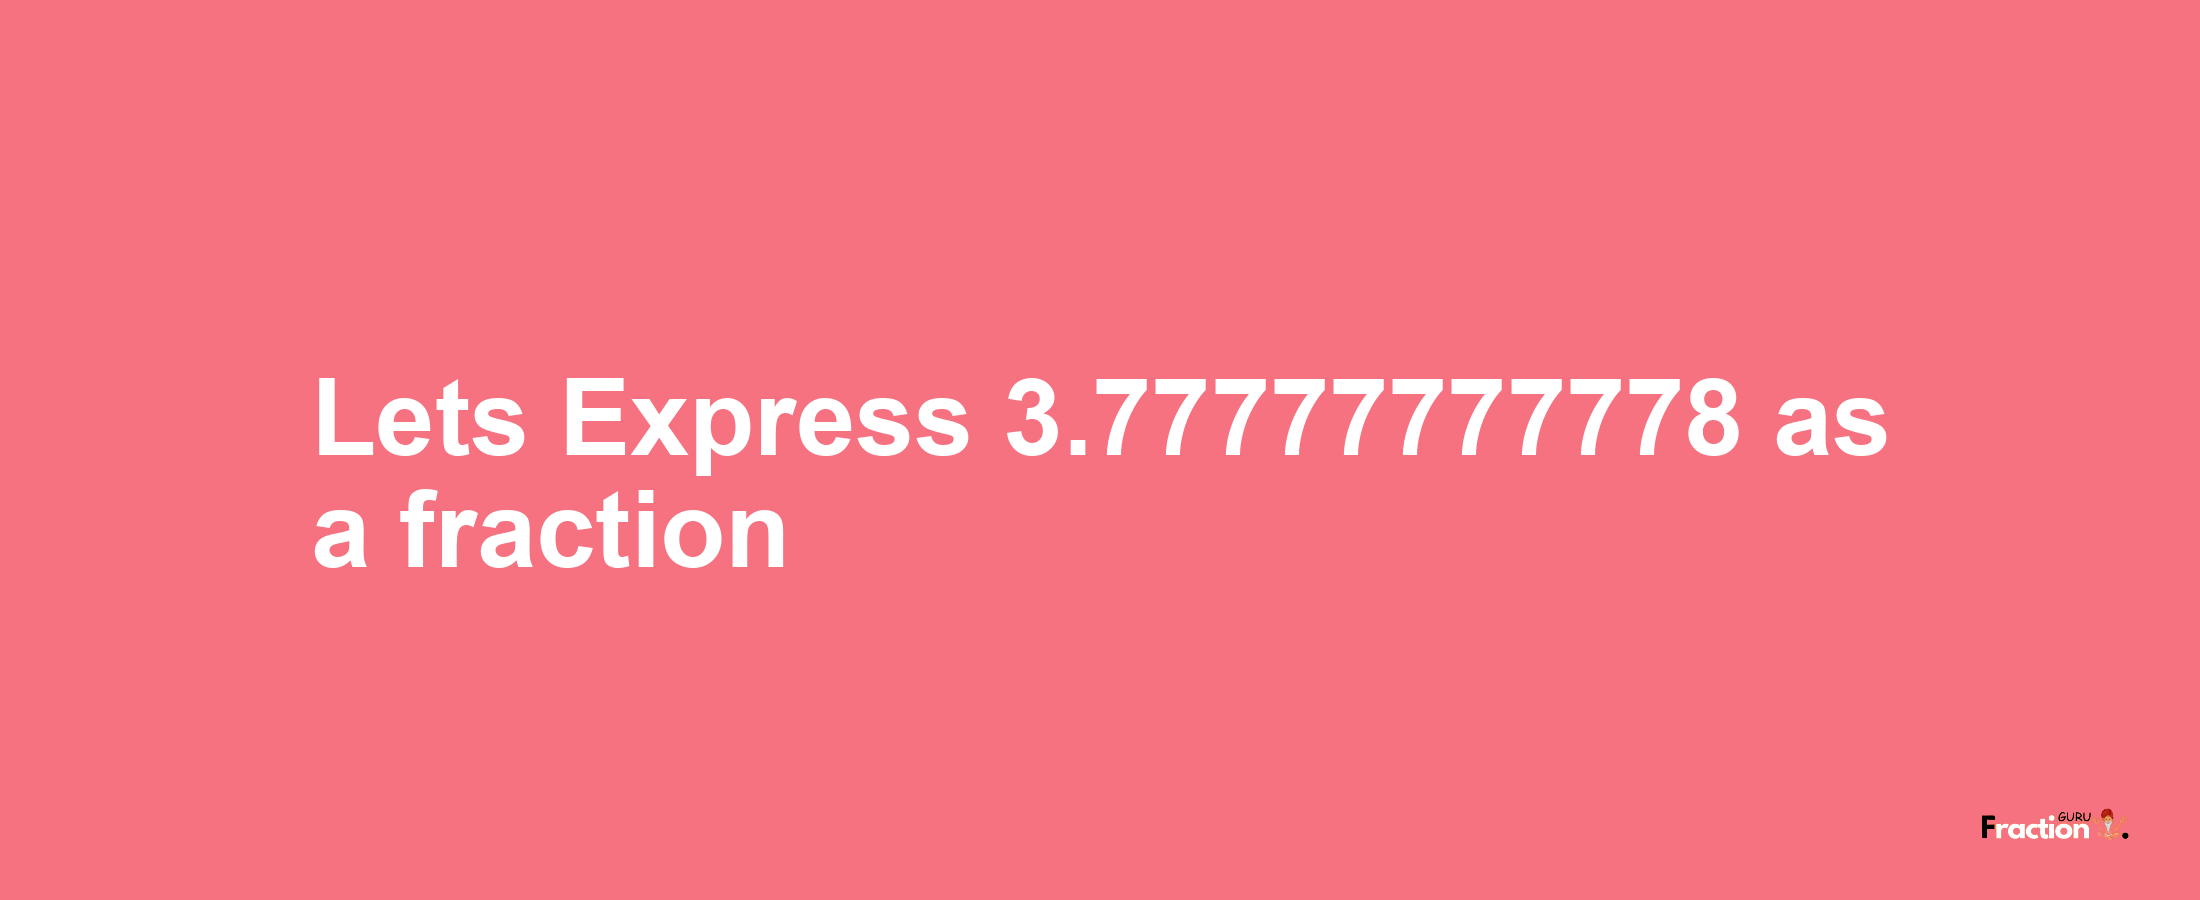 Lets Express 3.77777777778 as afraction